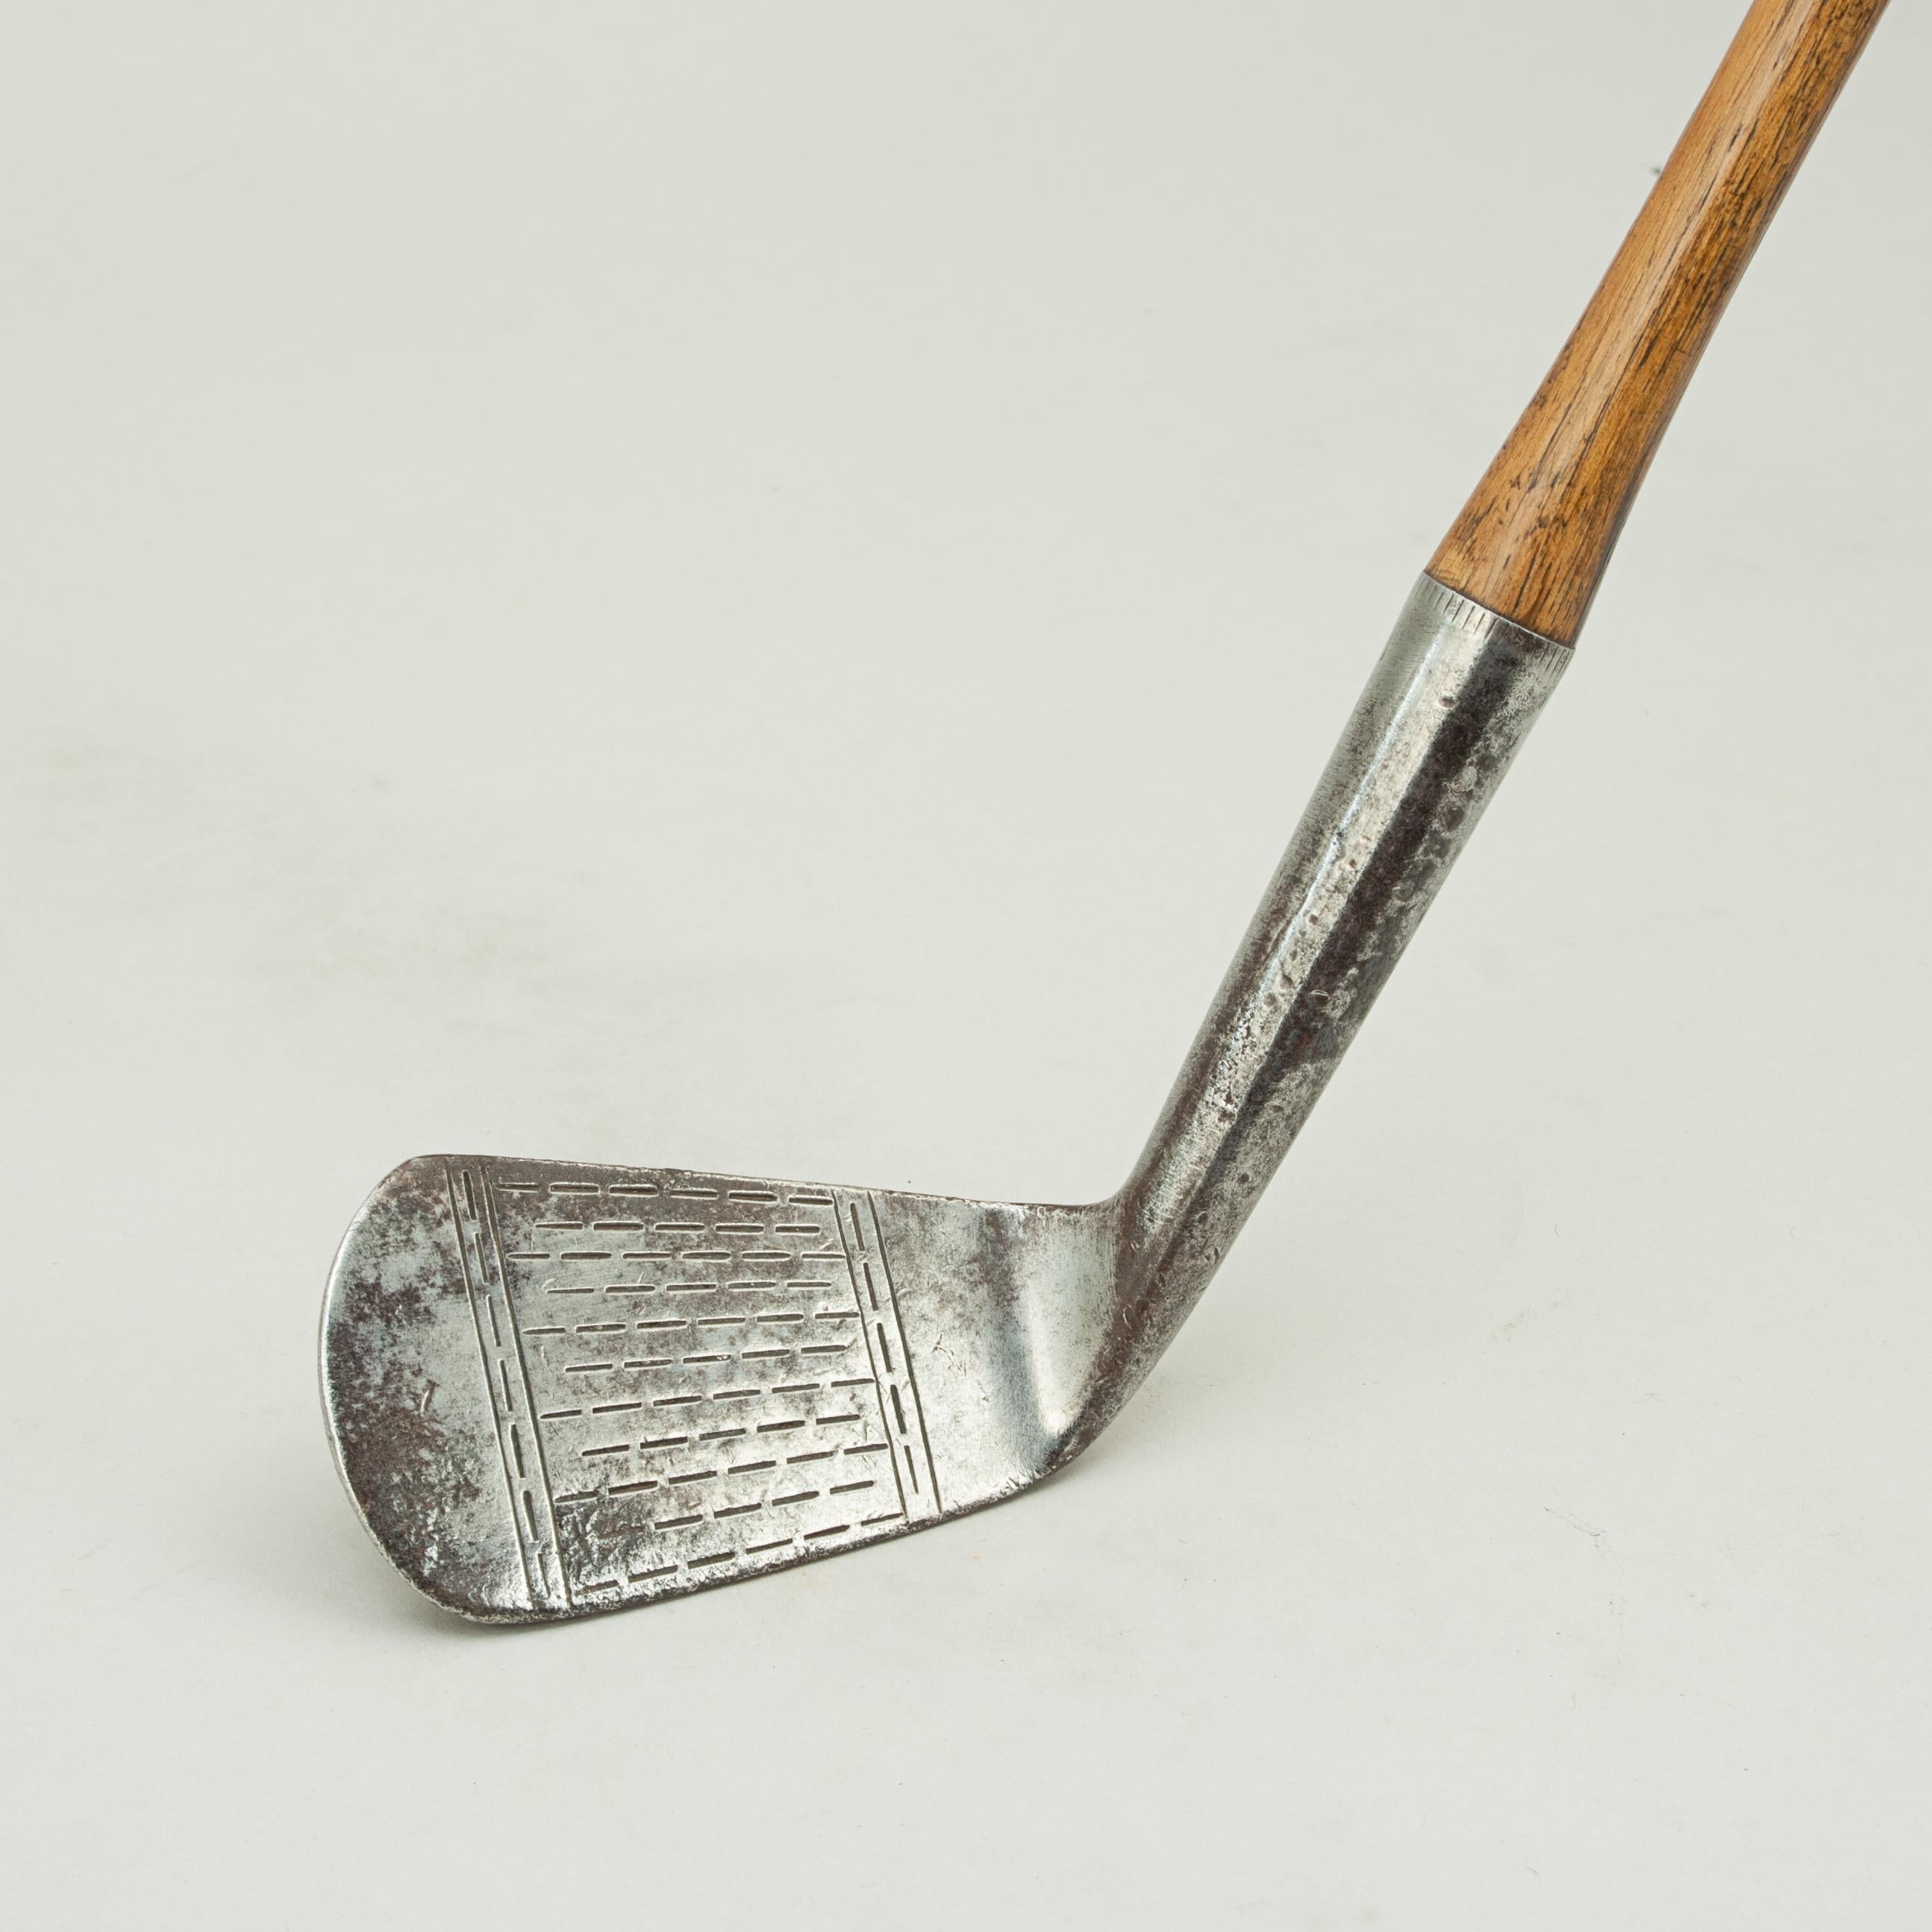 Vintage Hickory Golf Club, Deep Face Mashie, Chestney.
A good hickory shafted deep face mashie golf club by Henry Chestney. The club is with suede leather grip and could be used to play hickory golf with. The club head is with hyphen or dash face